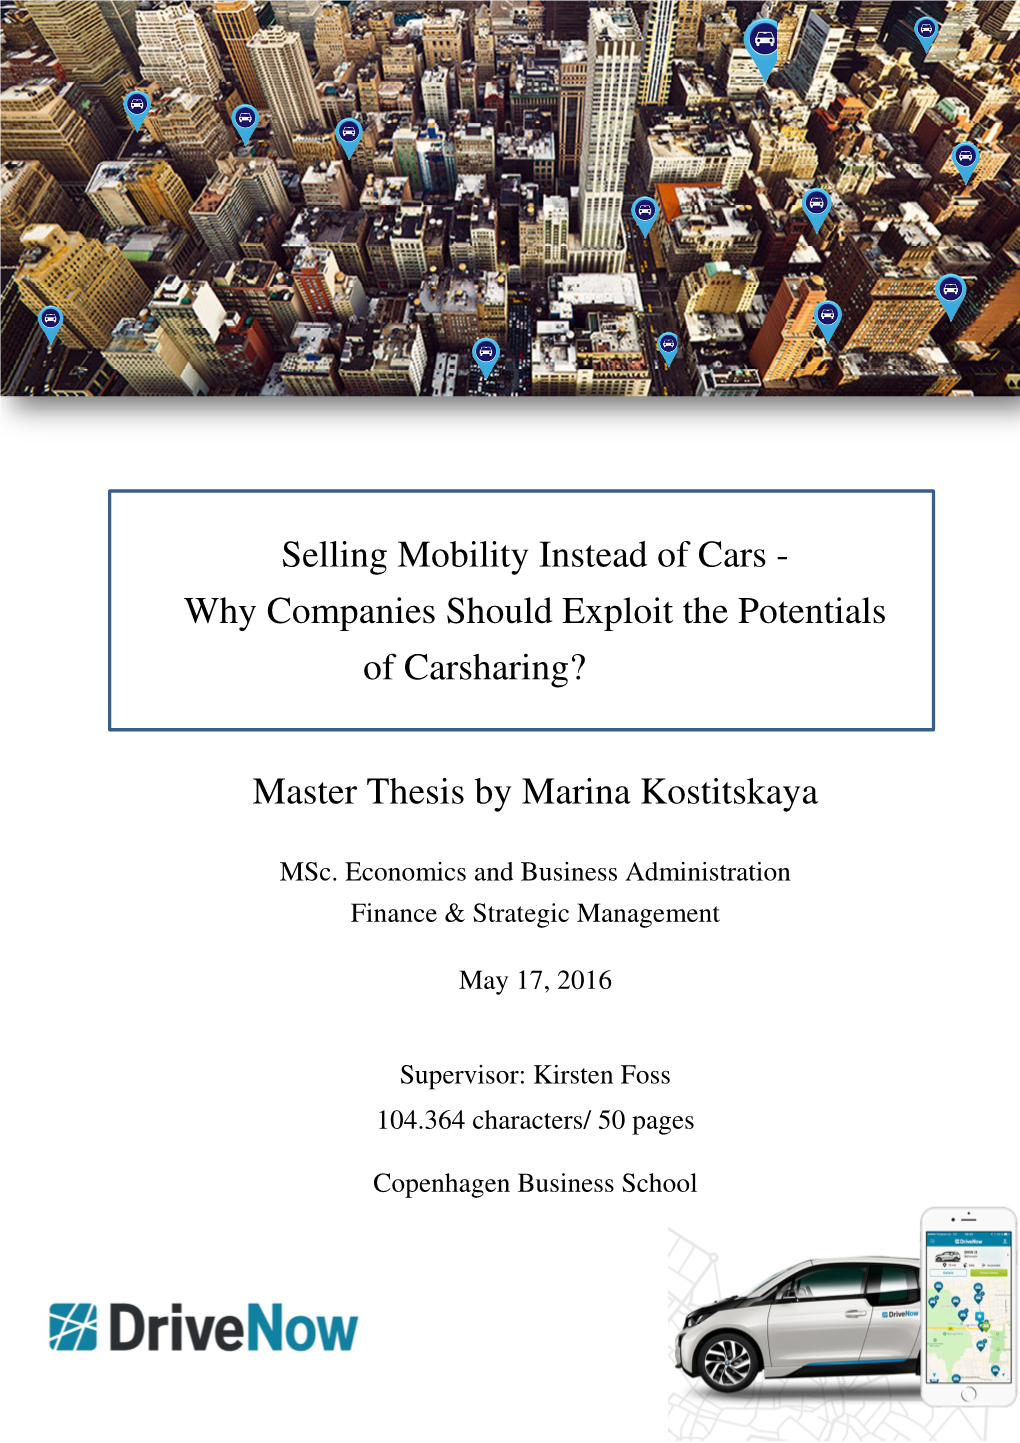 Selling Mobility Instead of Cars - Why Companies Should Exploit the Potentials of Carsharing?